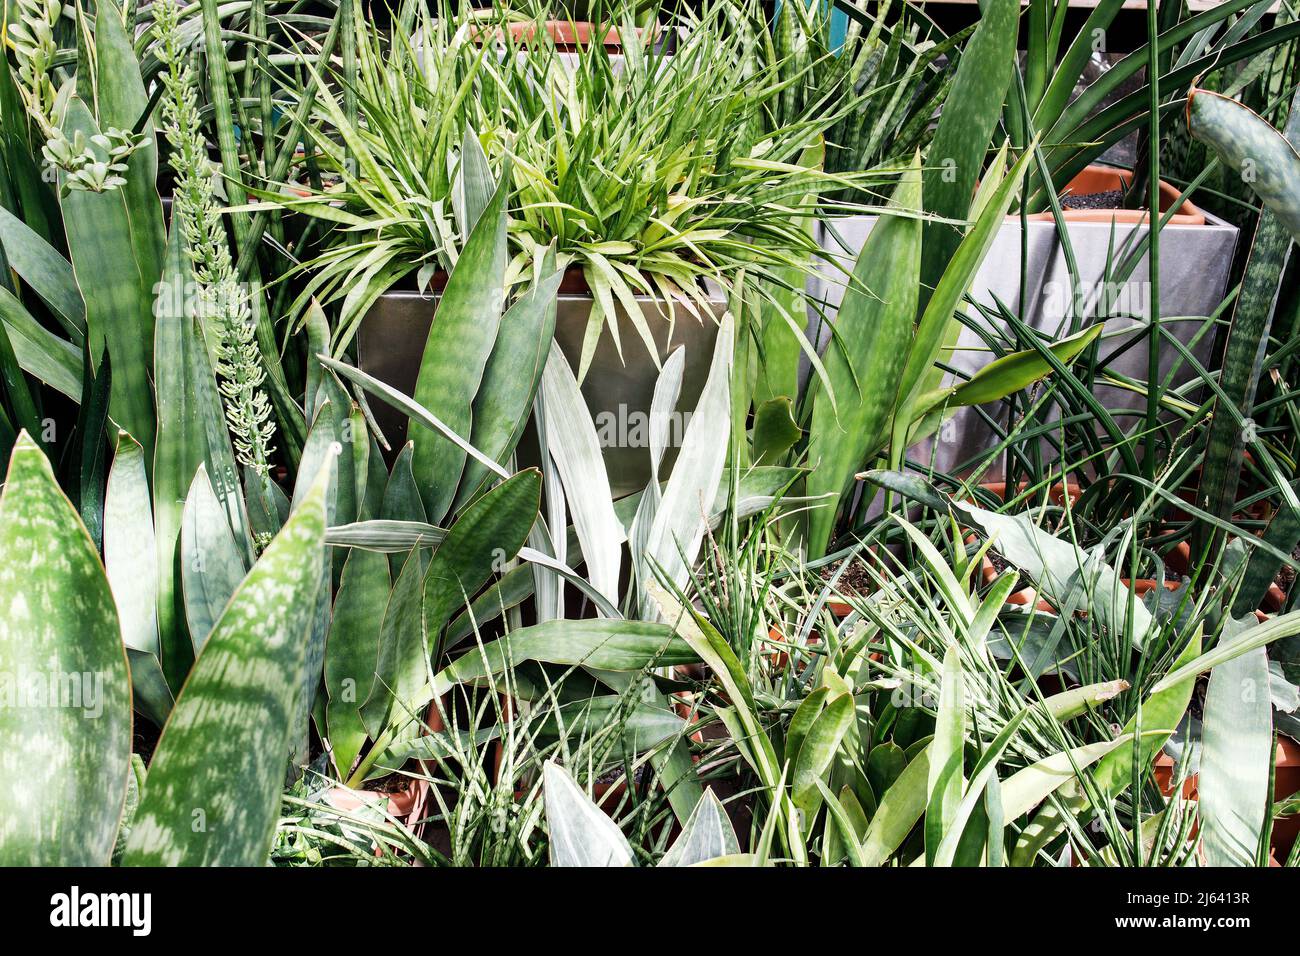 Various types of Sansevieria and asparagus in the Apothecary Garden greenhouse Stock Photo